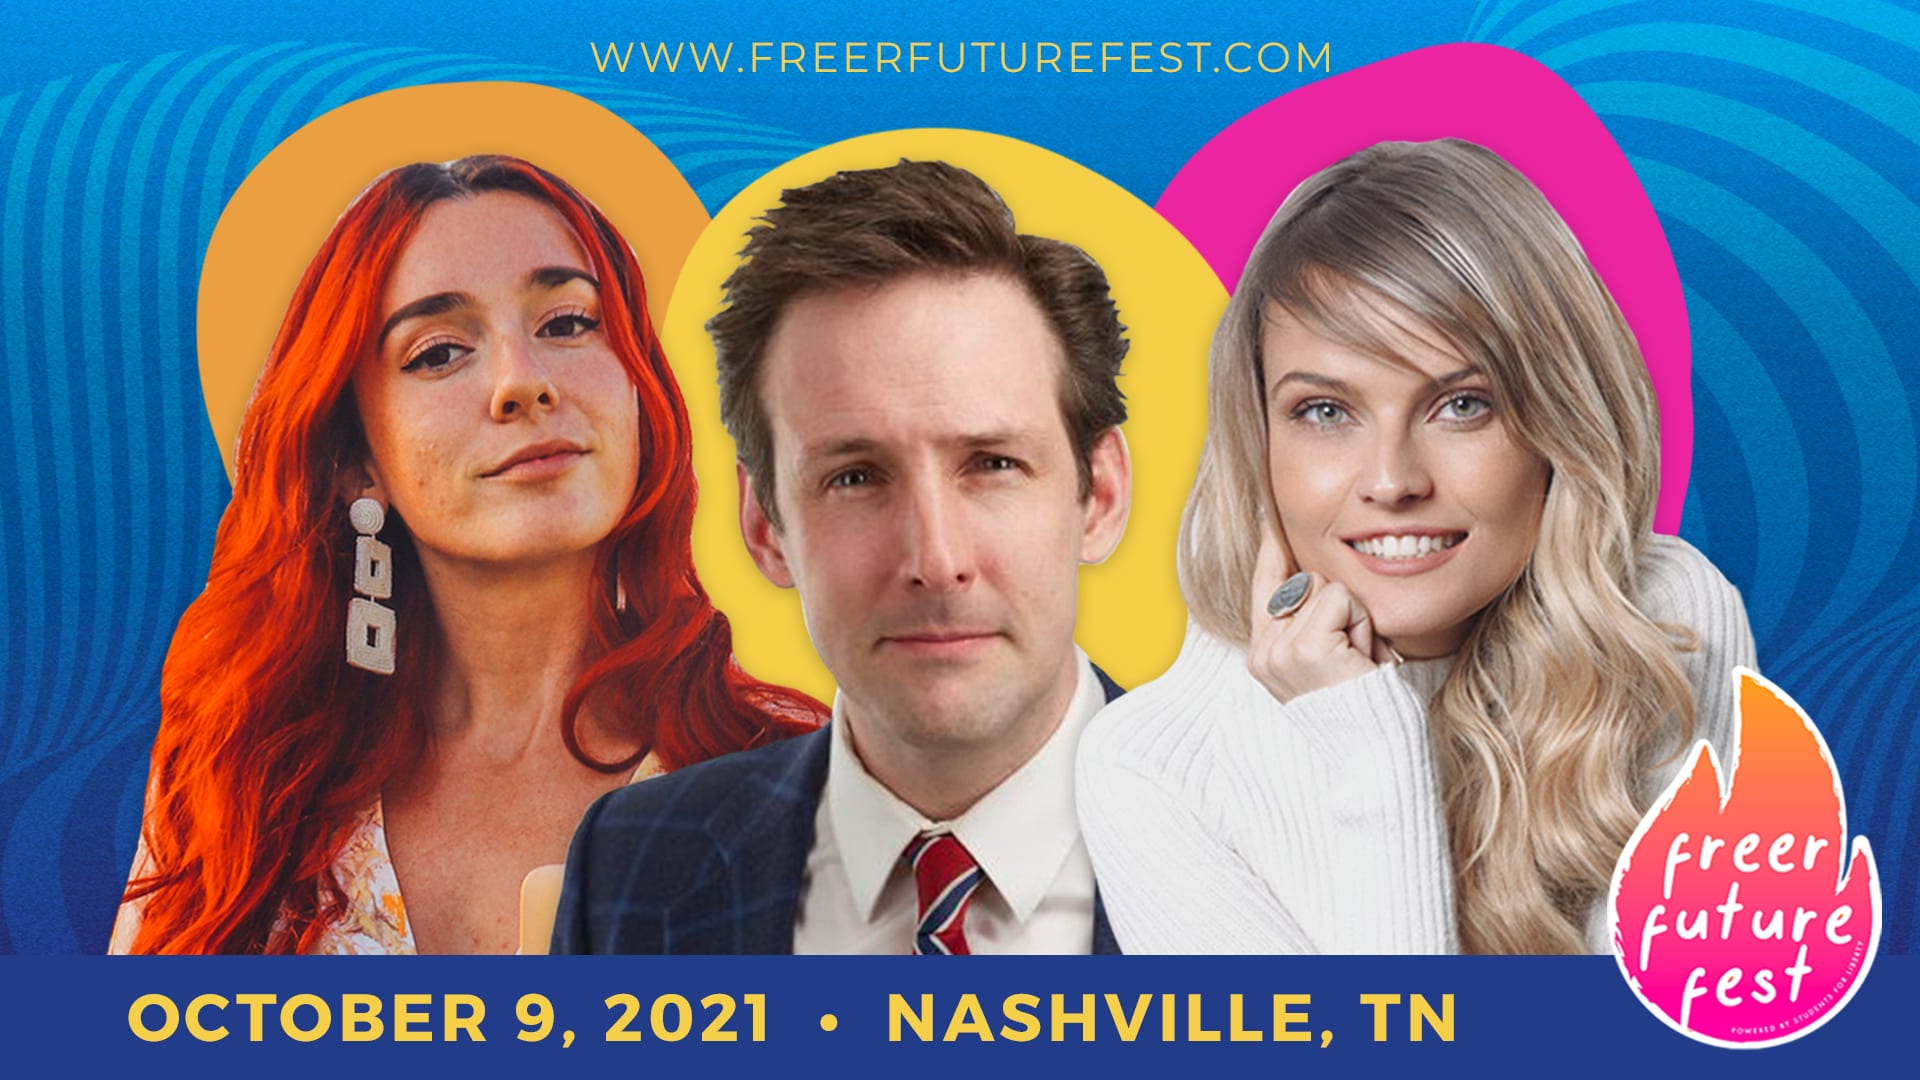 Students For Liberty will be hosting its new annual festival, Freer Future Fest, on October 9, 2021, at First Horizon Park in Nashville, TN.